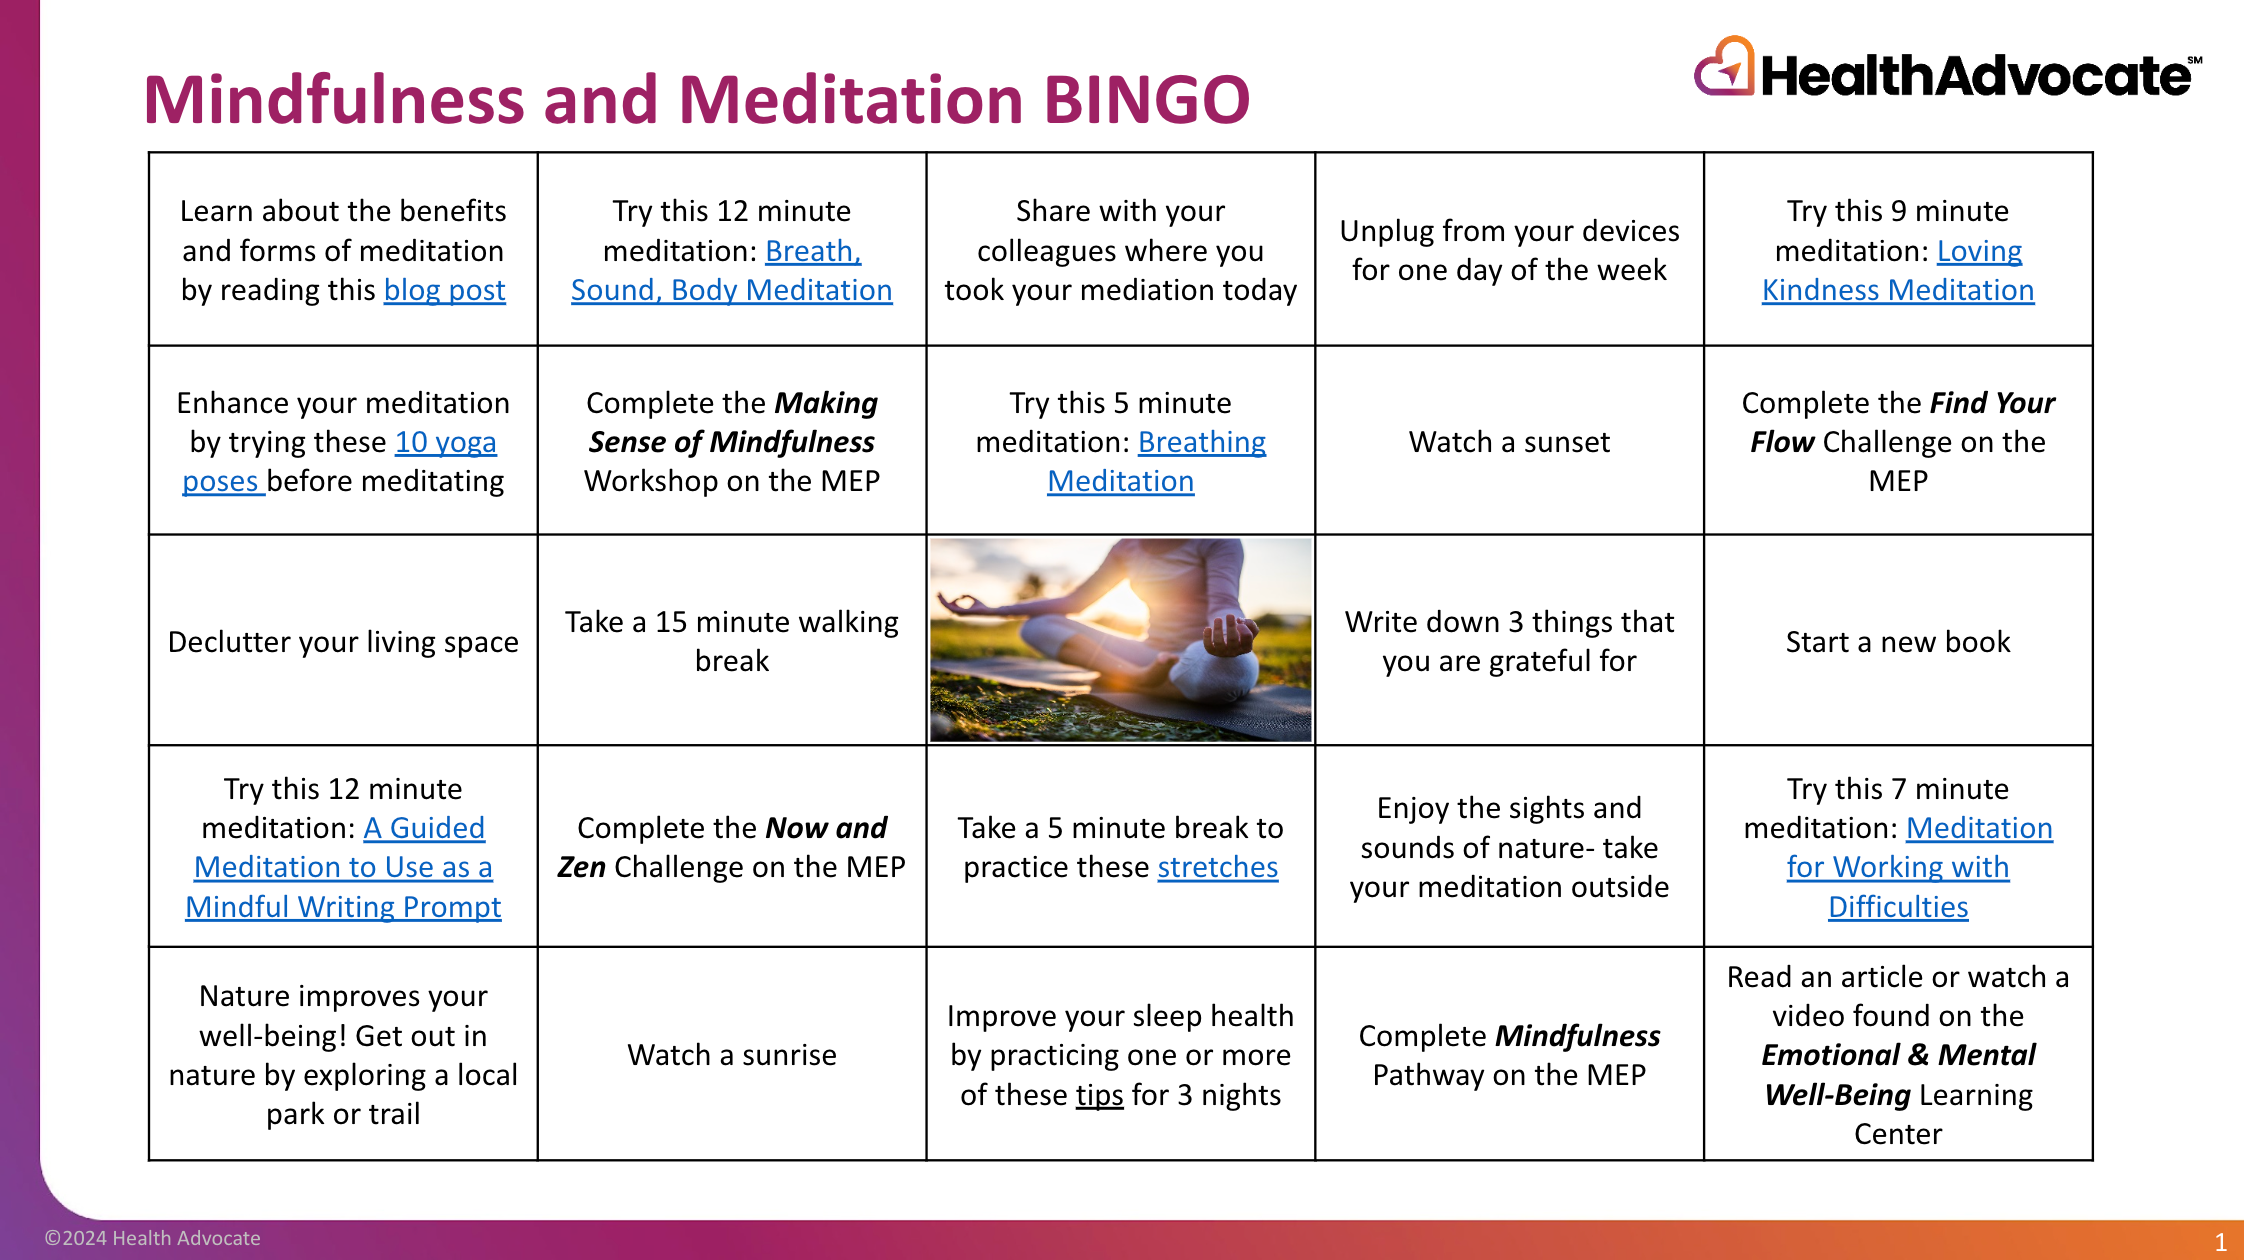 To view, click on links and download, please see the "Mindfulness and Meditation BINGO" via PDF in BOX.